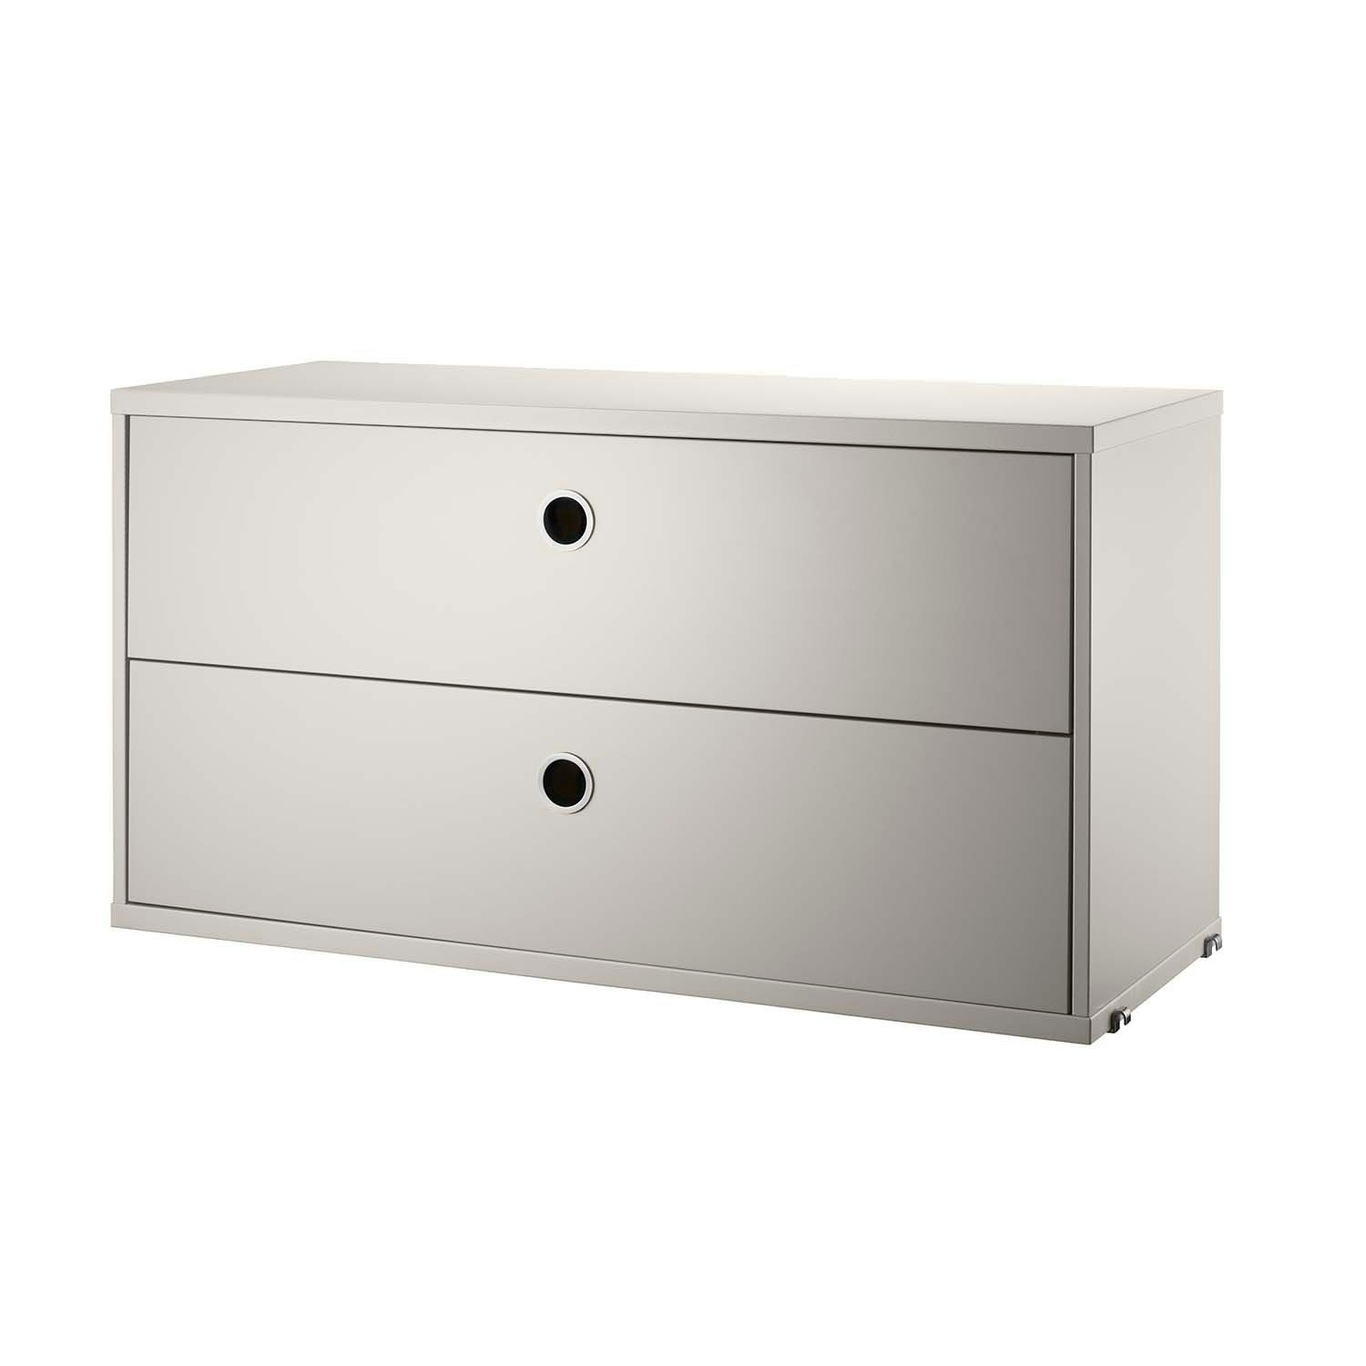 String Chest Of Drawers 78x30 cm, Beige